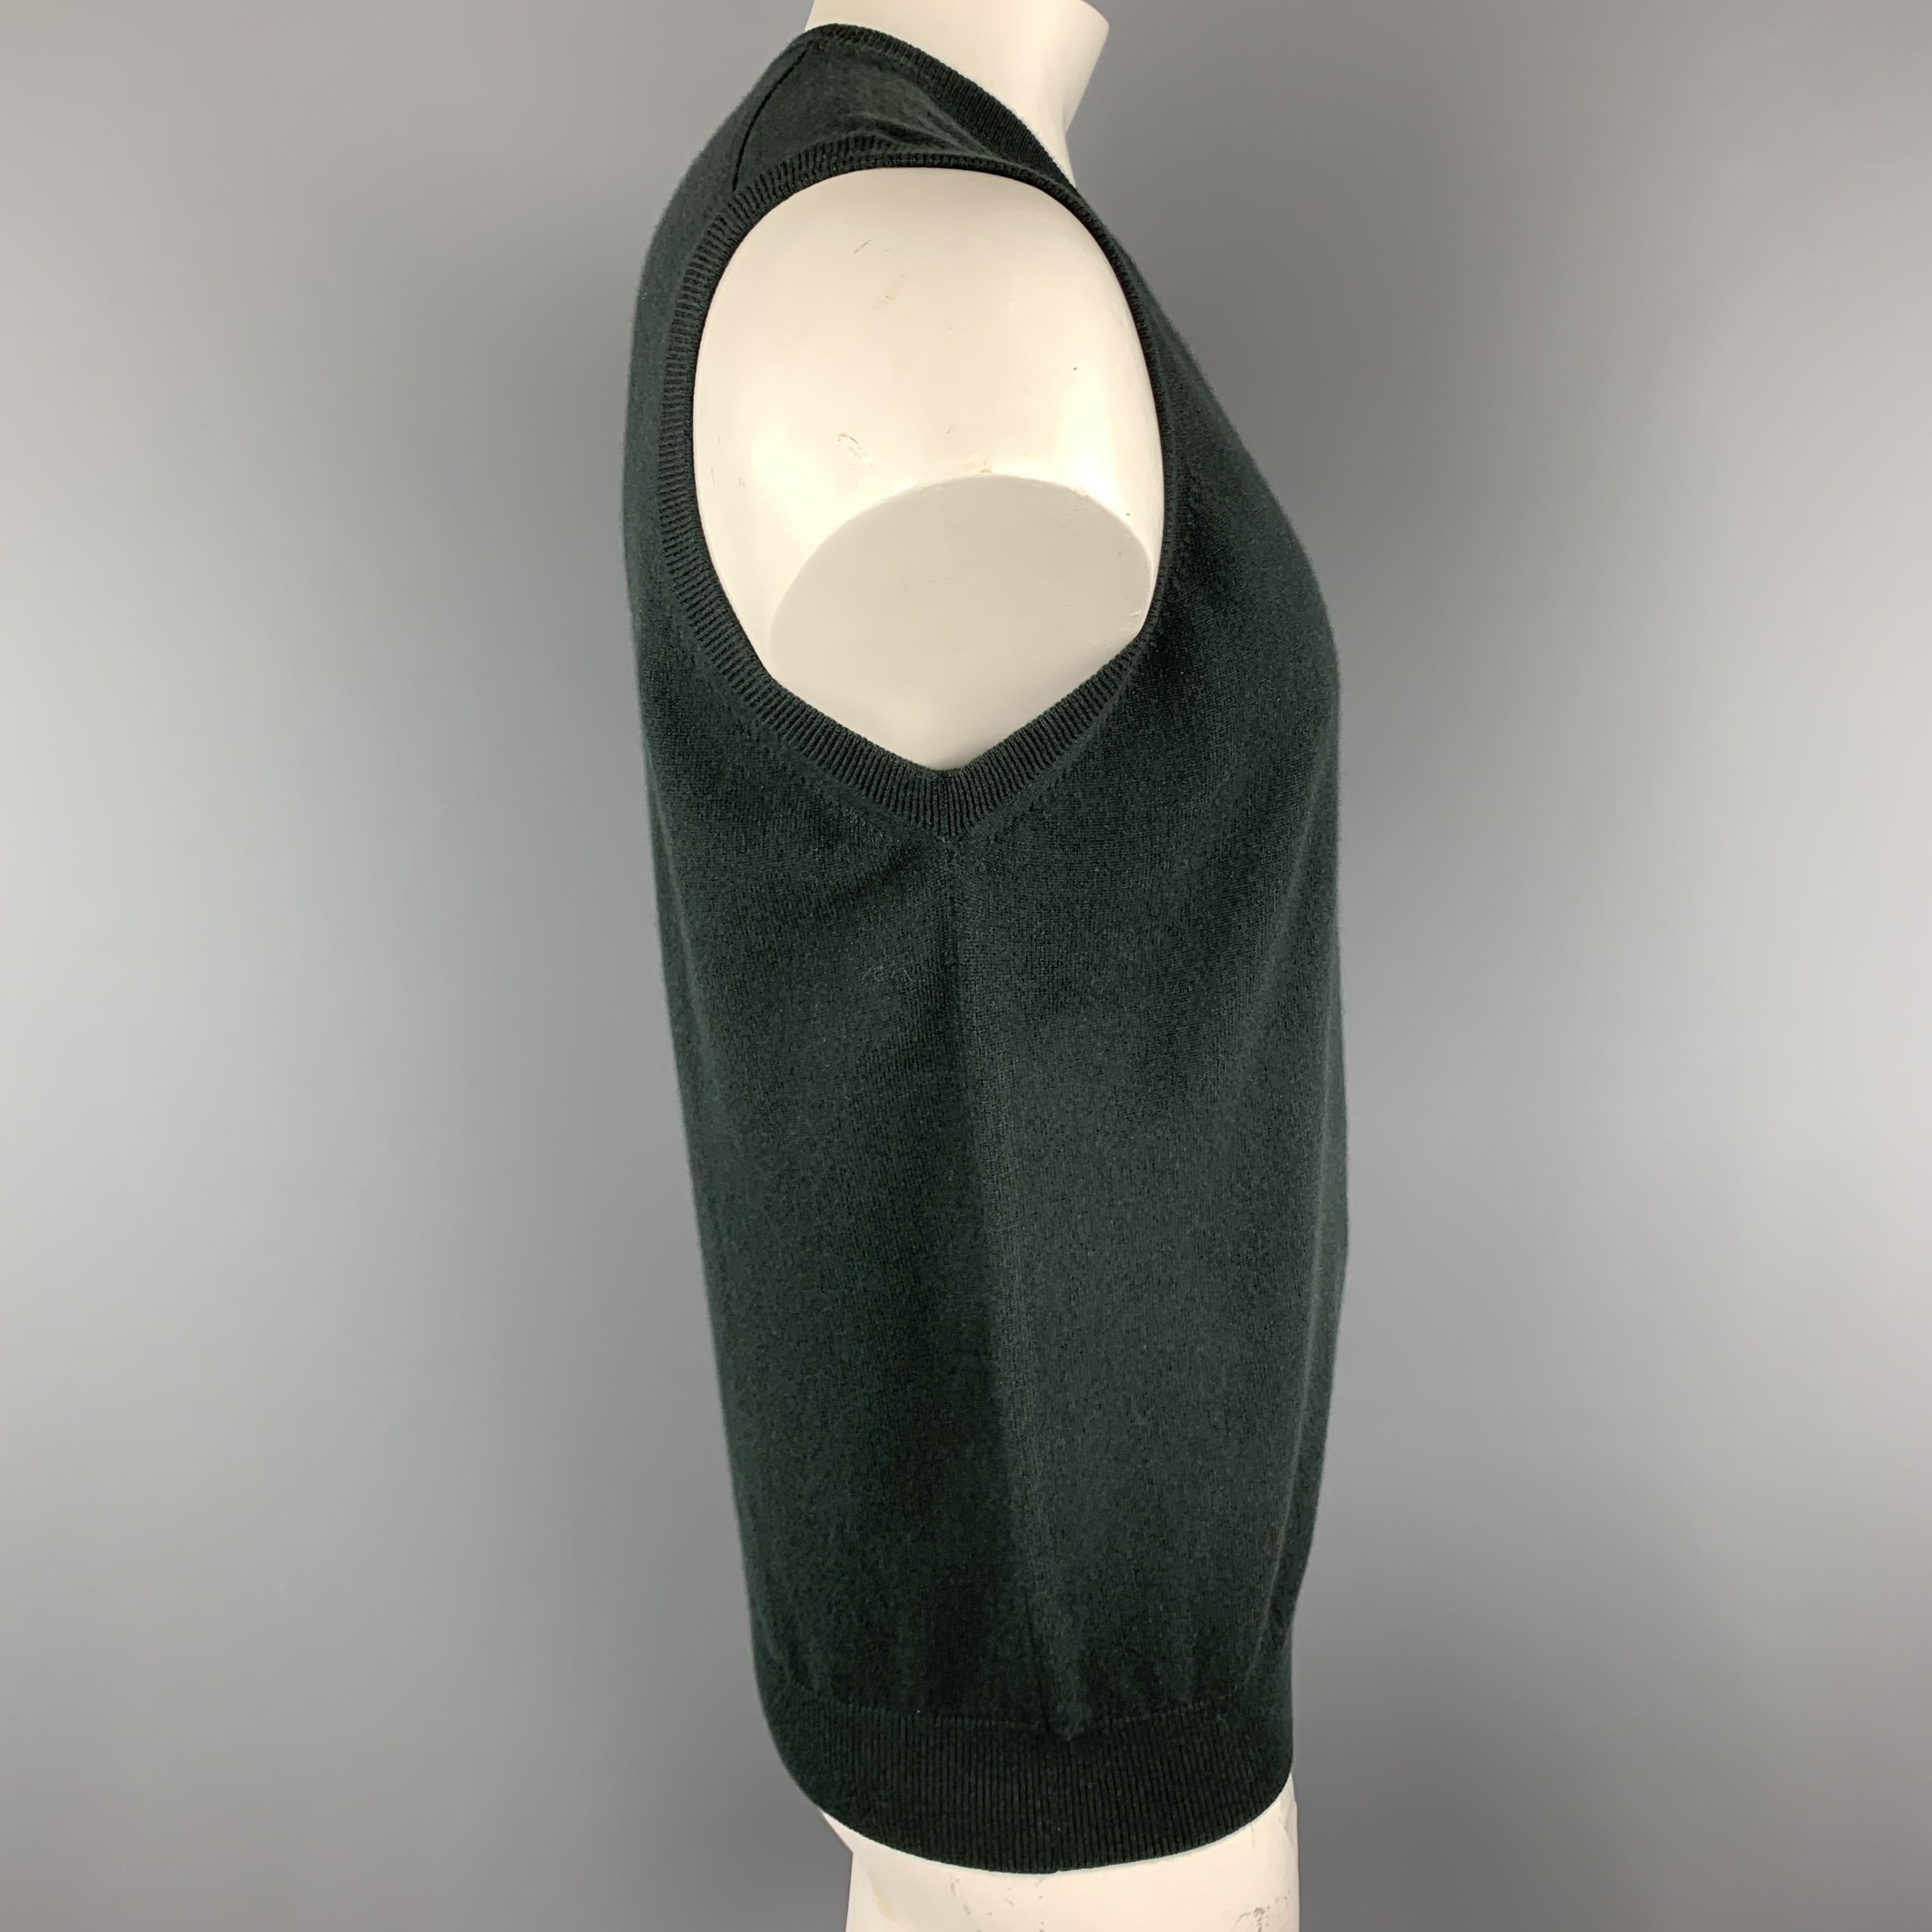 N. Peal sweater vest comes in cashmere knit with a v neck. 

Excellent Pre-Owned Condition.
Marked: L

Measurements:

Shoulder: 18 in.
Chest: 44 in.
Length: 27 in.